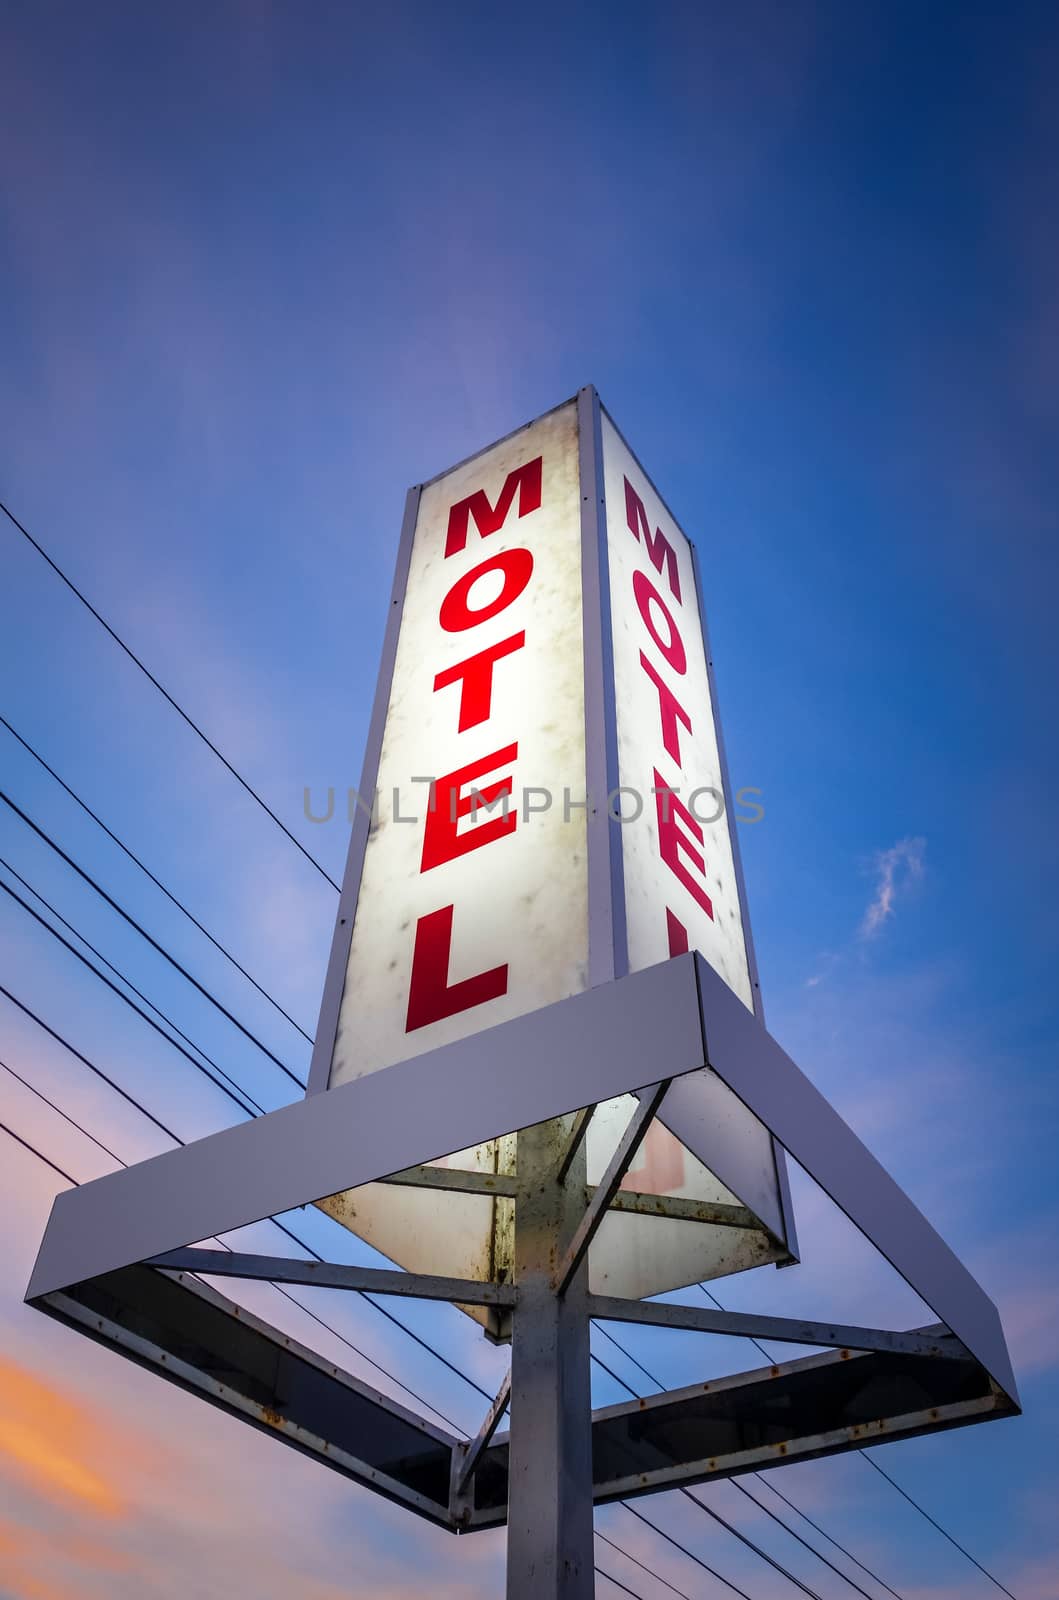 Vintage motel sign at sunset  by daboost